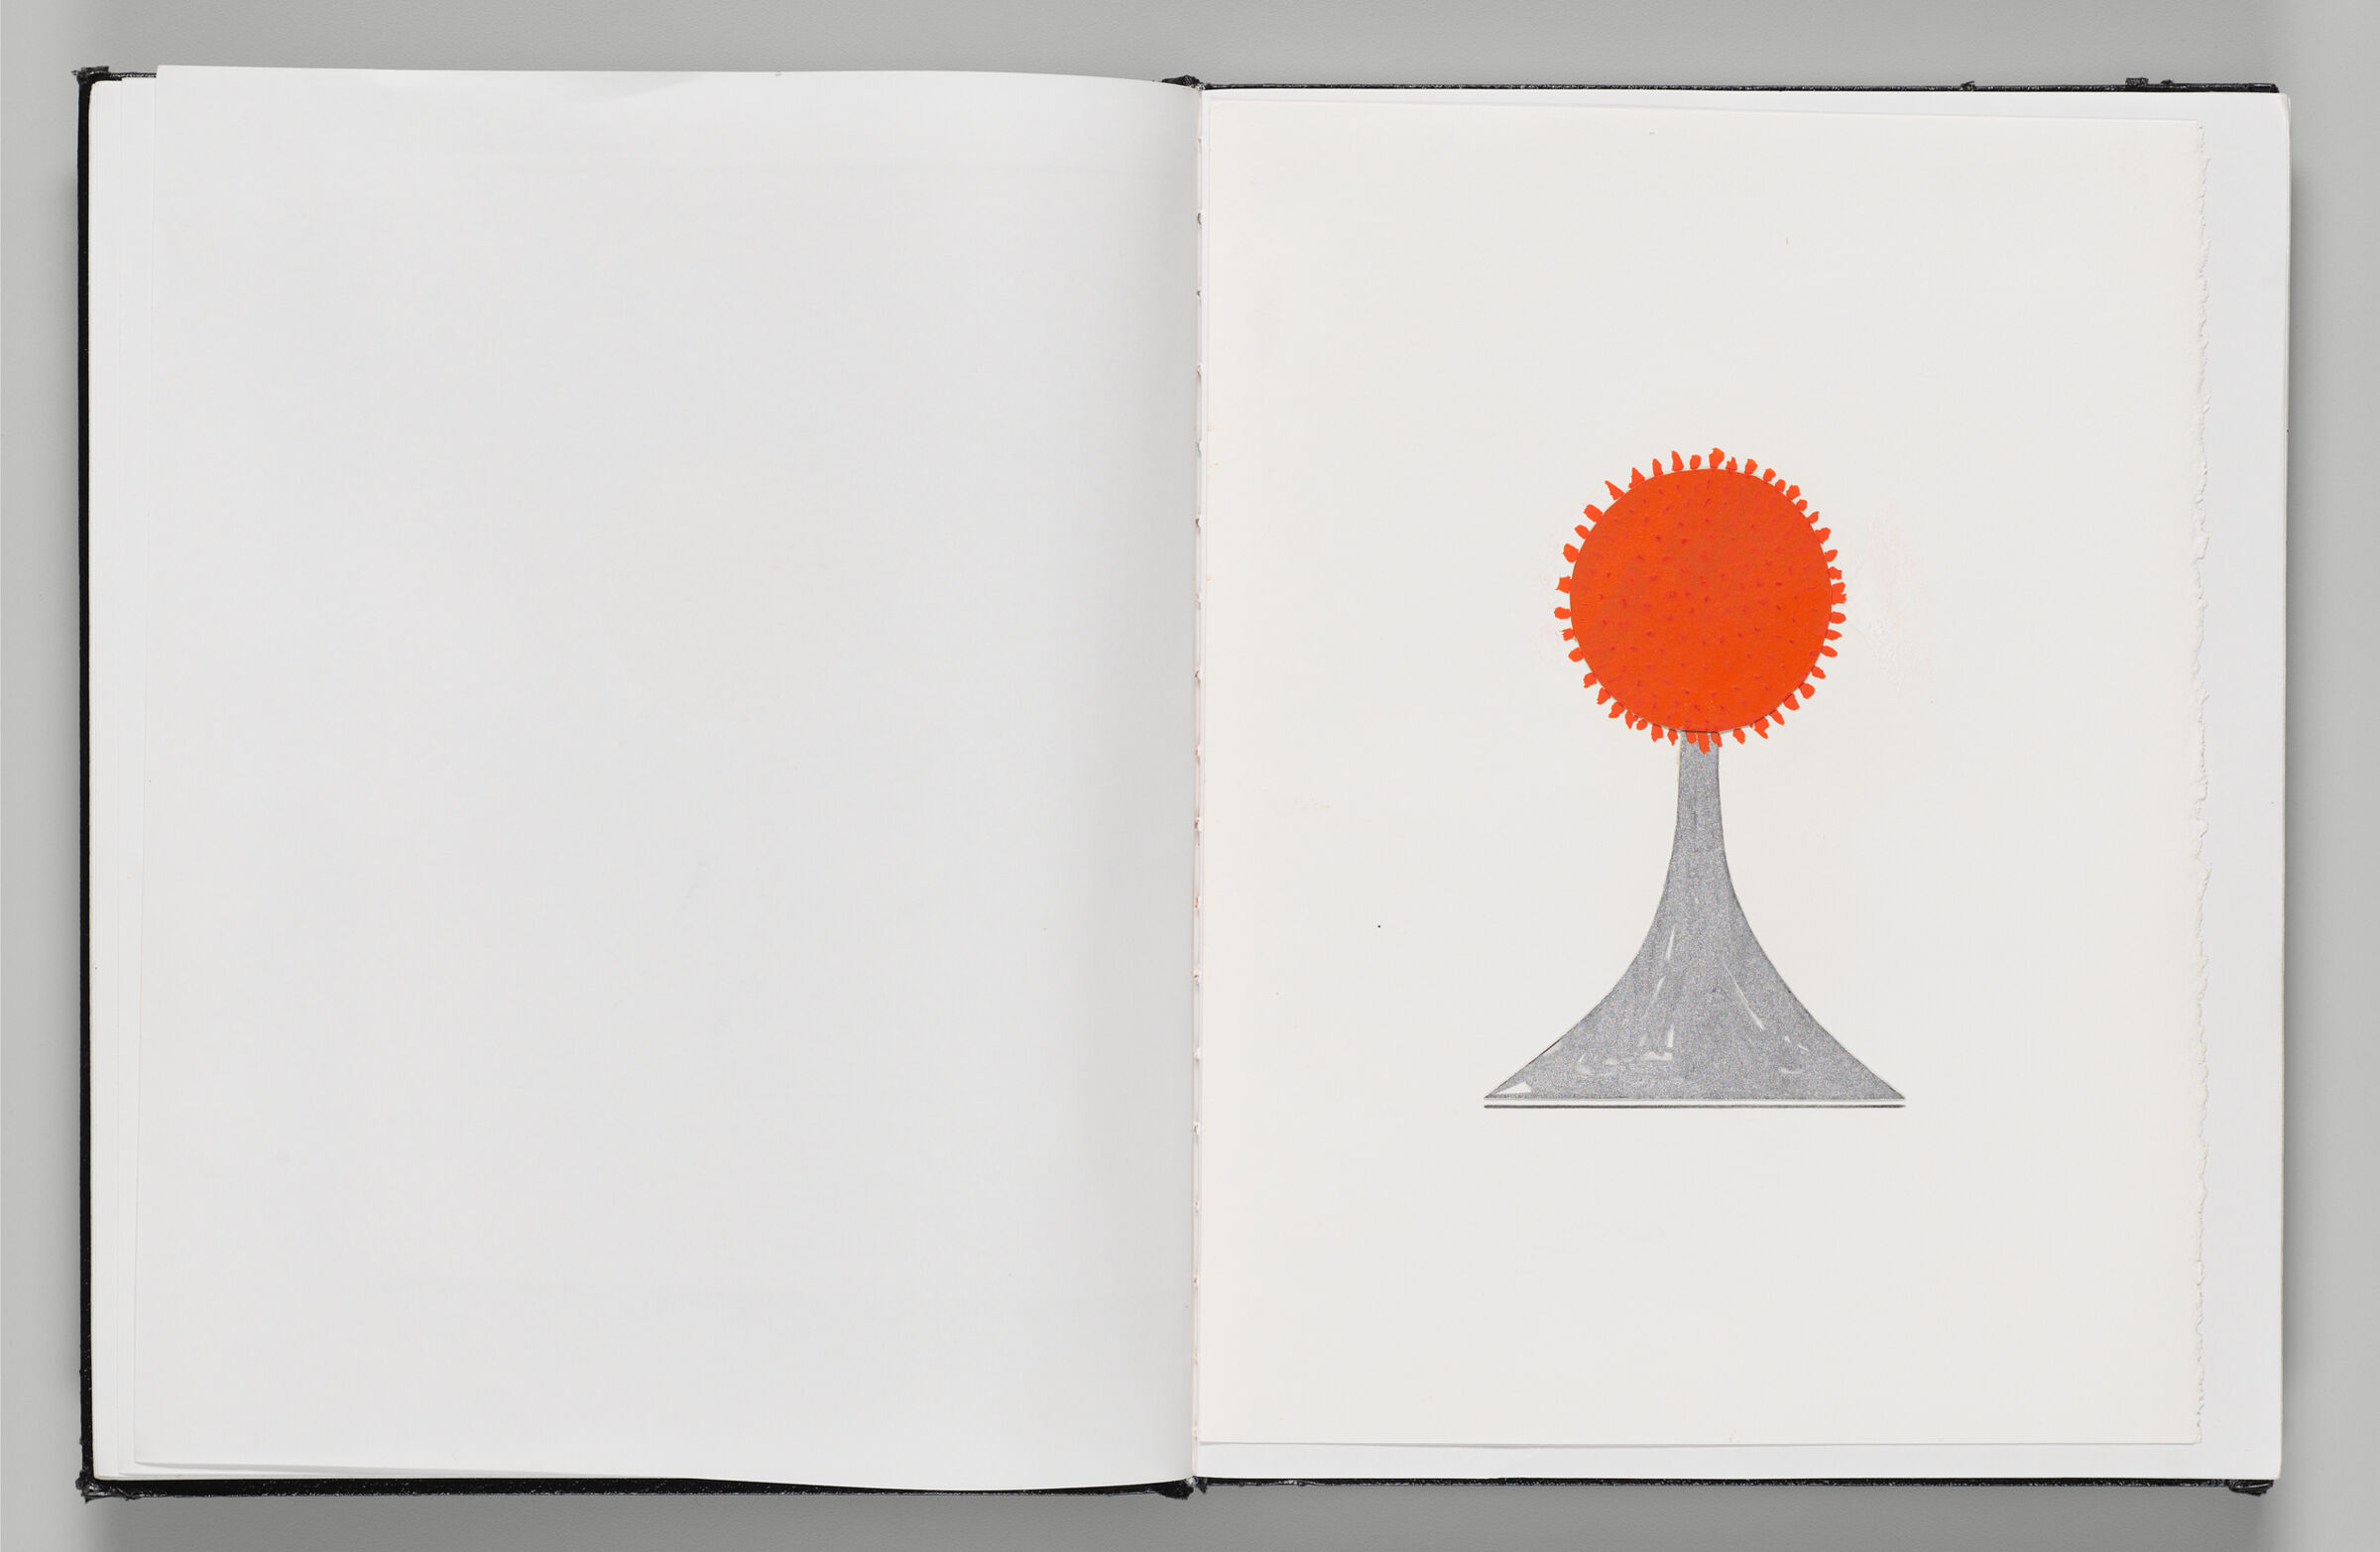 Untitled (Blank, Left Page); Untitled (Adhered Collage Of Neon Sculpture, Right Page)
